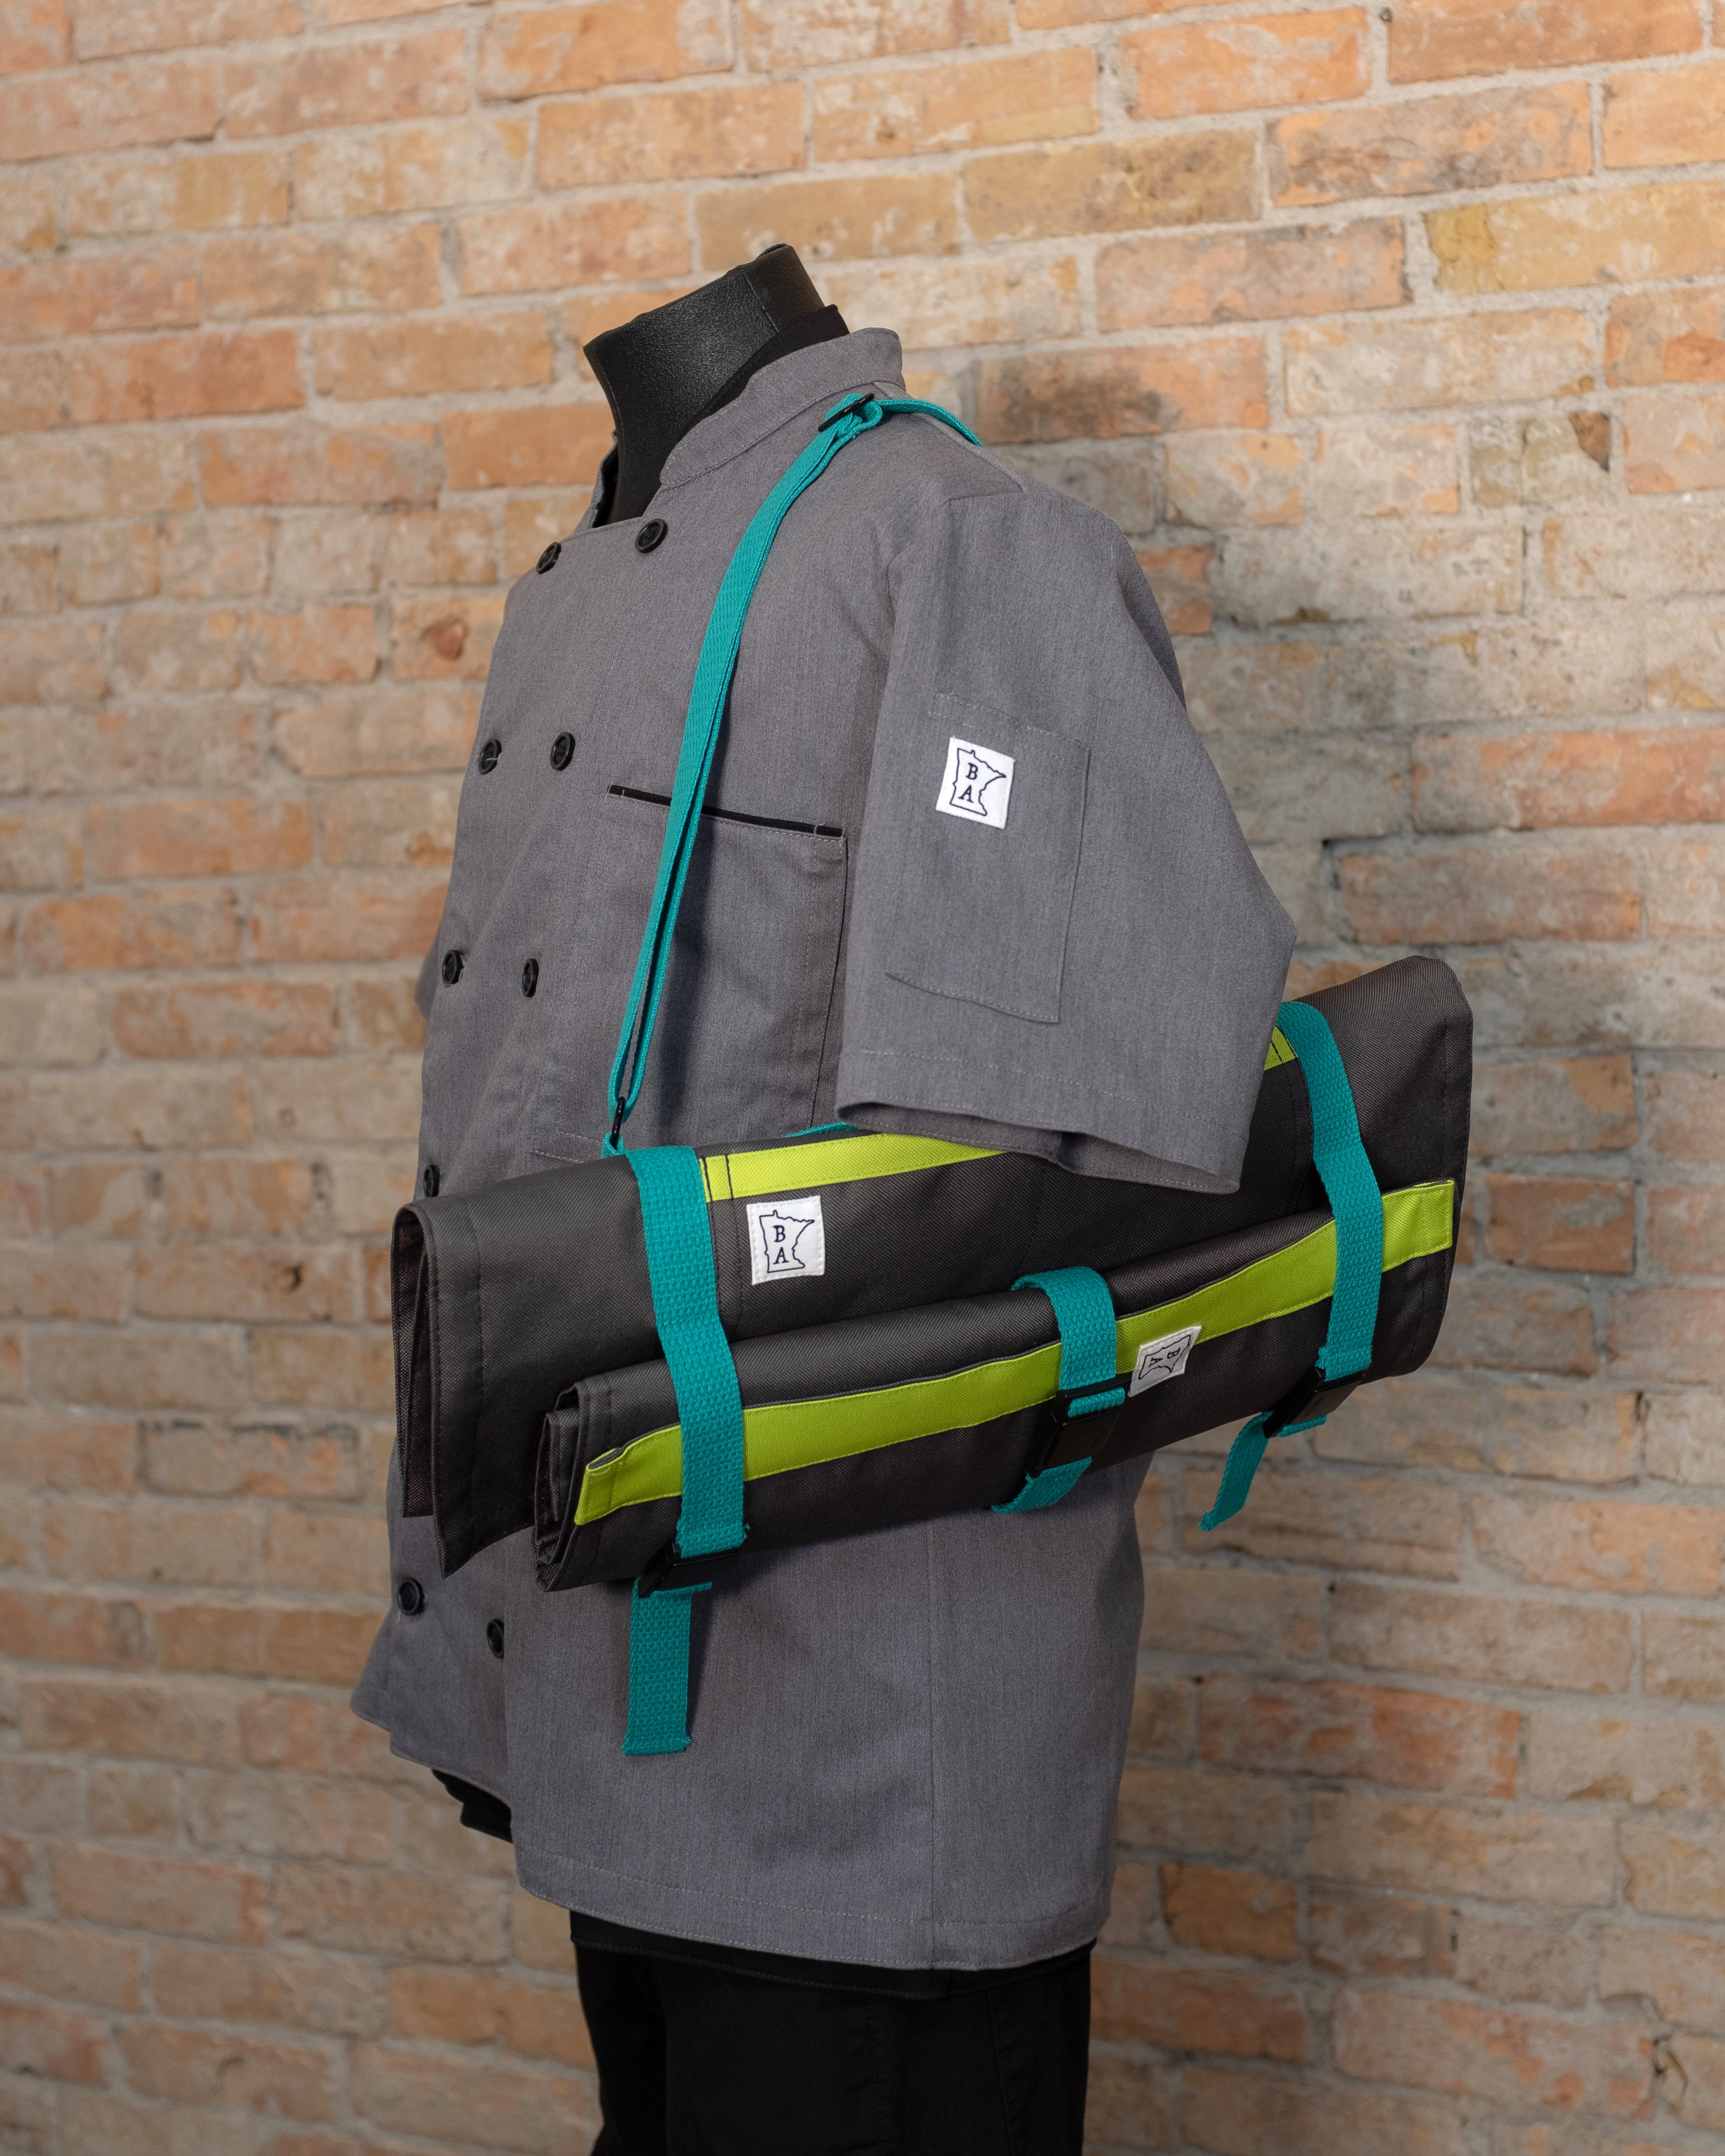 Main Squeeze Ottertex Edition /Totally Rad knife roll with matching Side Hustle knife roll slung over the shoulder of a mannequin in a gray chef coat. All items were designed by Craftmade Aprons, based in Minnesota.